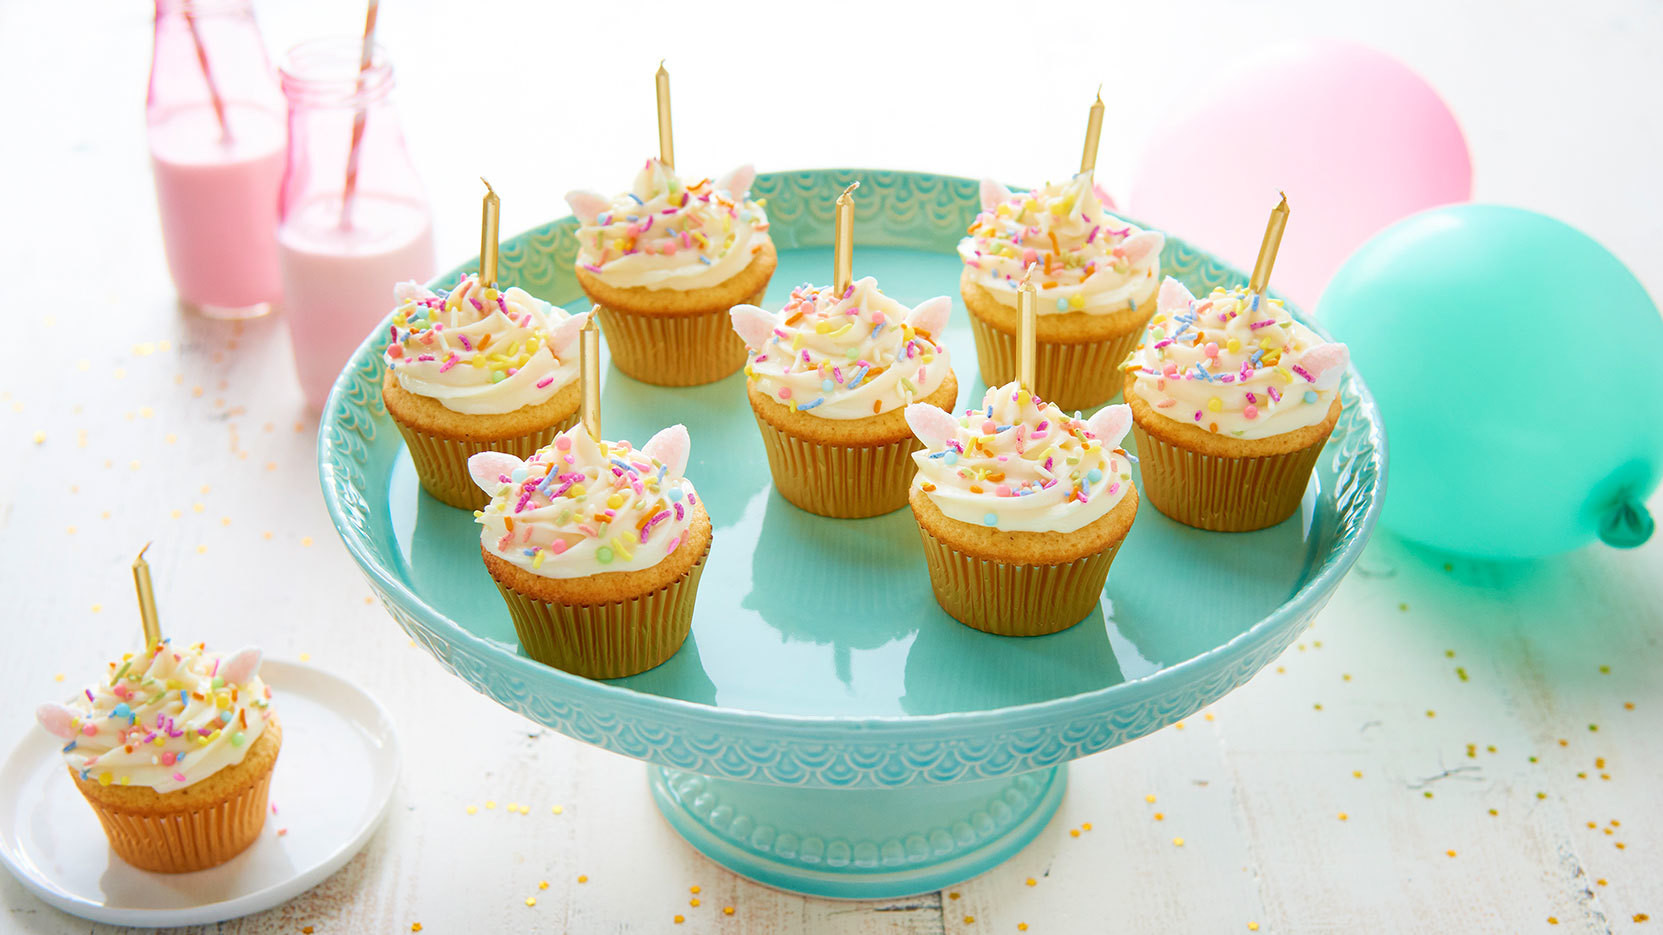 Unicorn Bday Party Ideas
 Magical Unicorn Birthday Party Ideas for Kids EatingWell